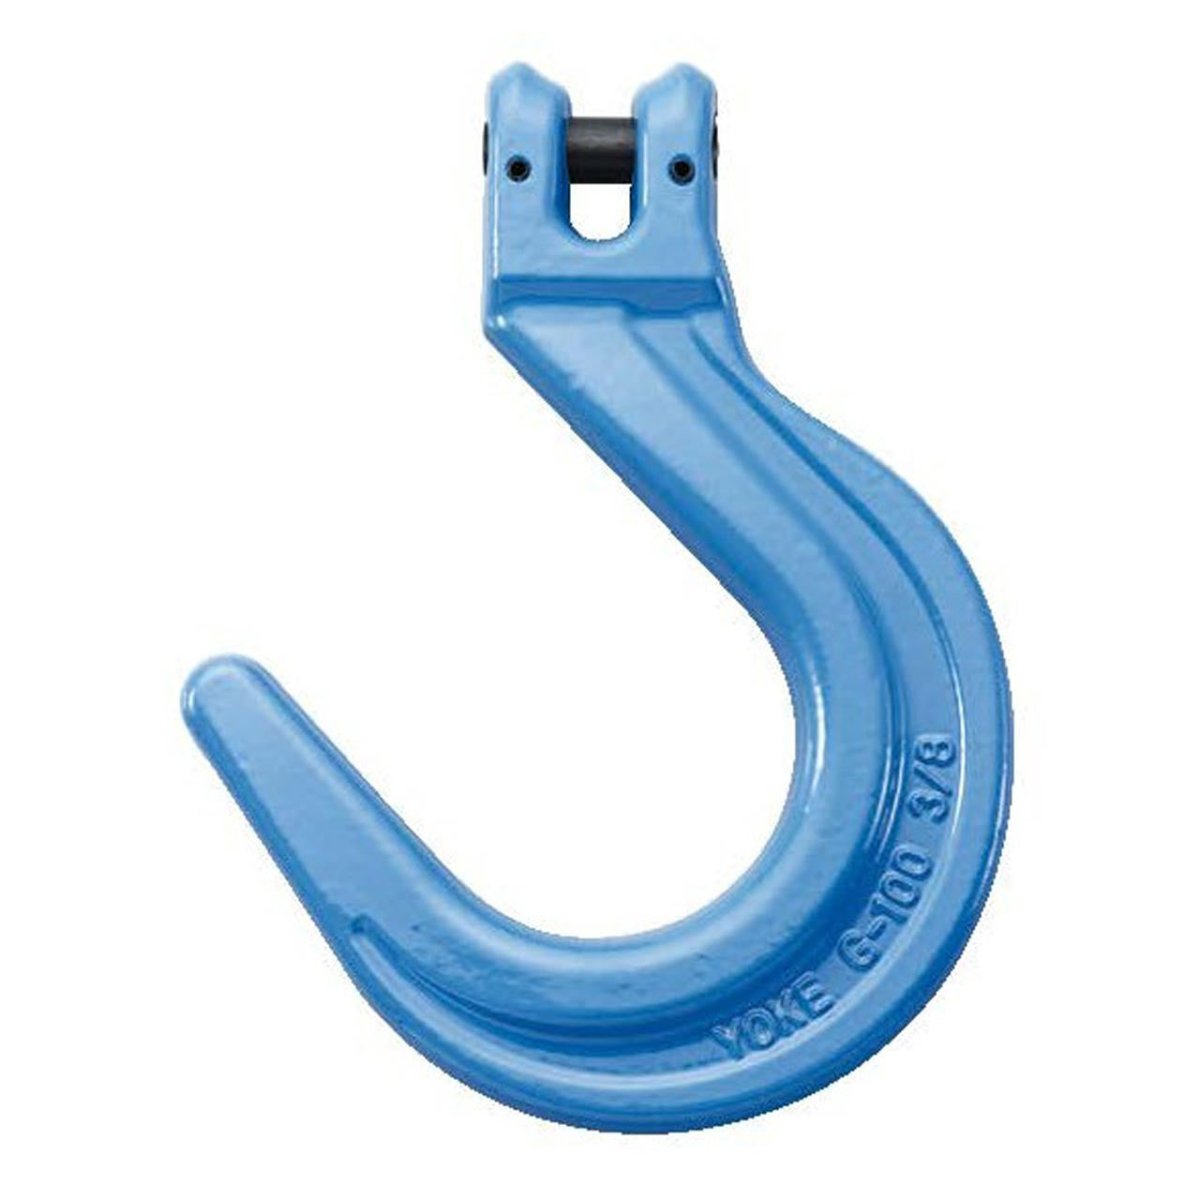 B/A Products Co. Grade 100 Foundry Hook - starequipmentsales